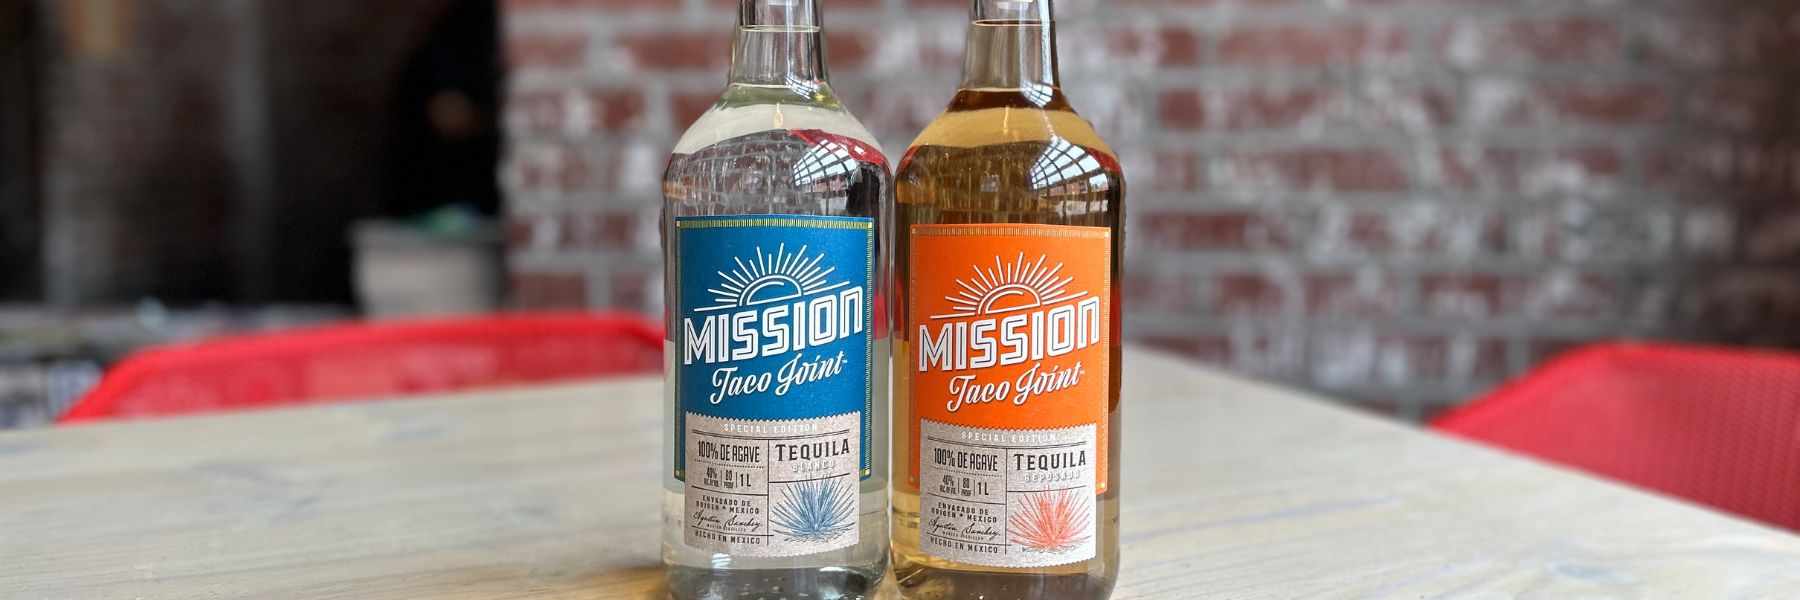 The line of private-label tequilas from Mission Taco Joint include blanco and reposado tequilas.